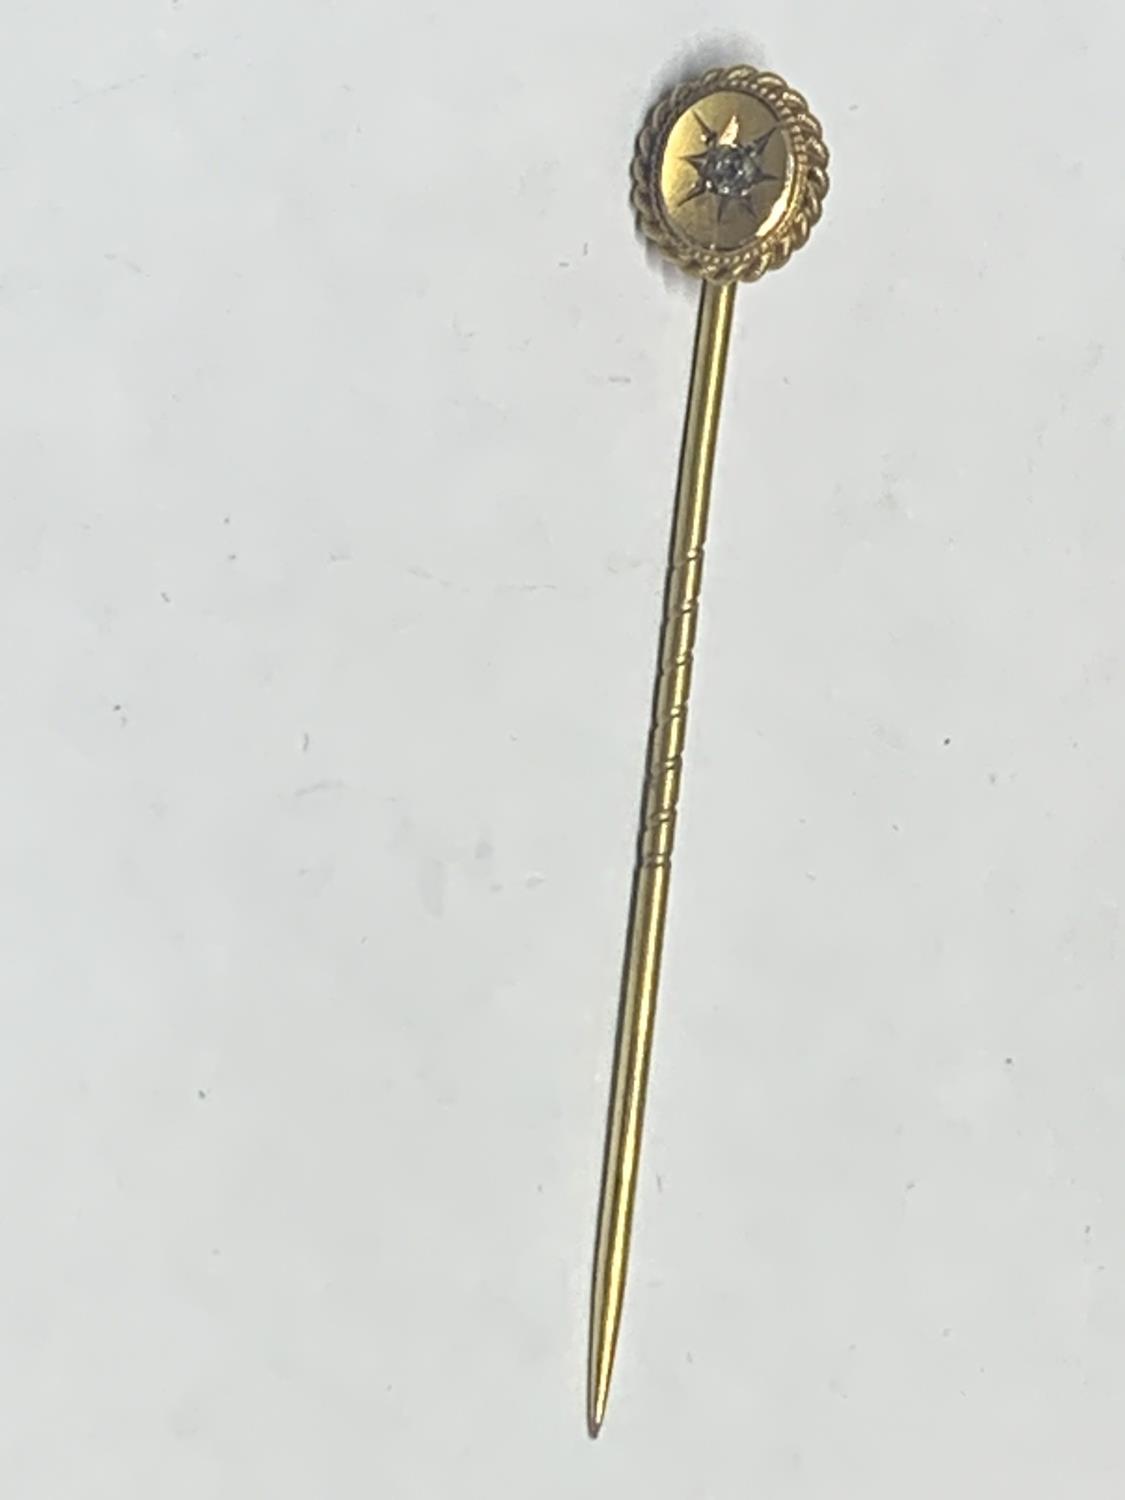 A 15 CARAT GOLD PIN BROOCH WITH A SOLITAIRE IN A PRESENTATION BOX - Image 2 of 3